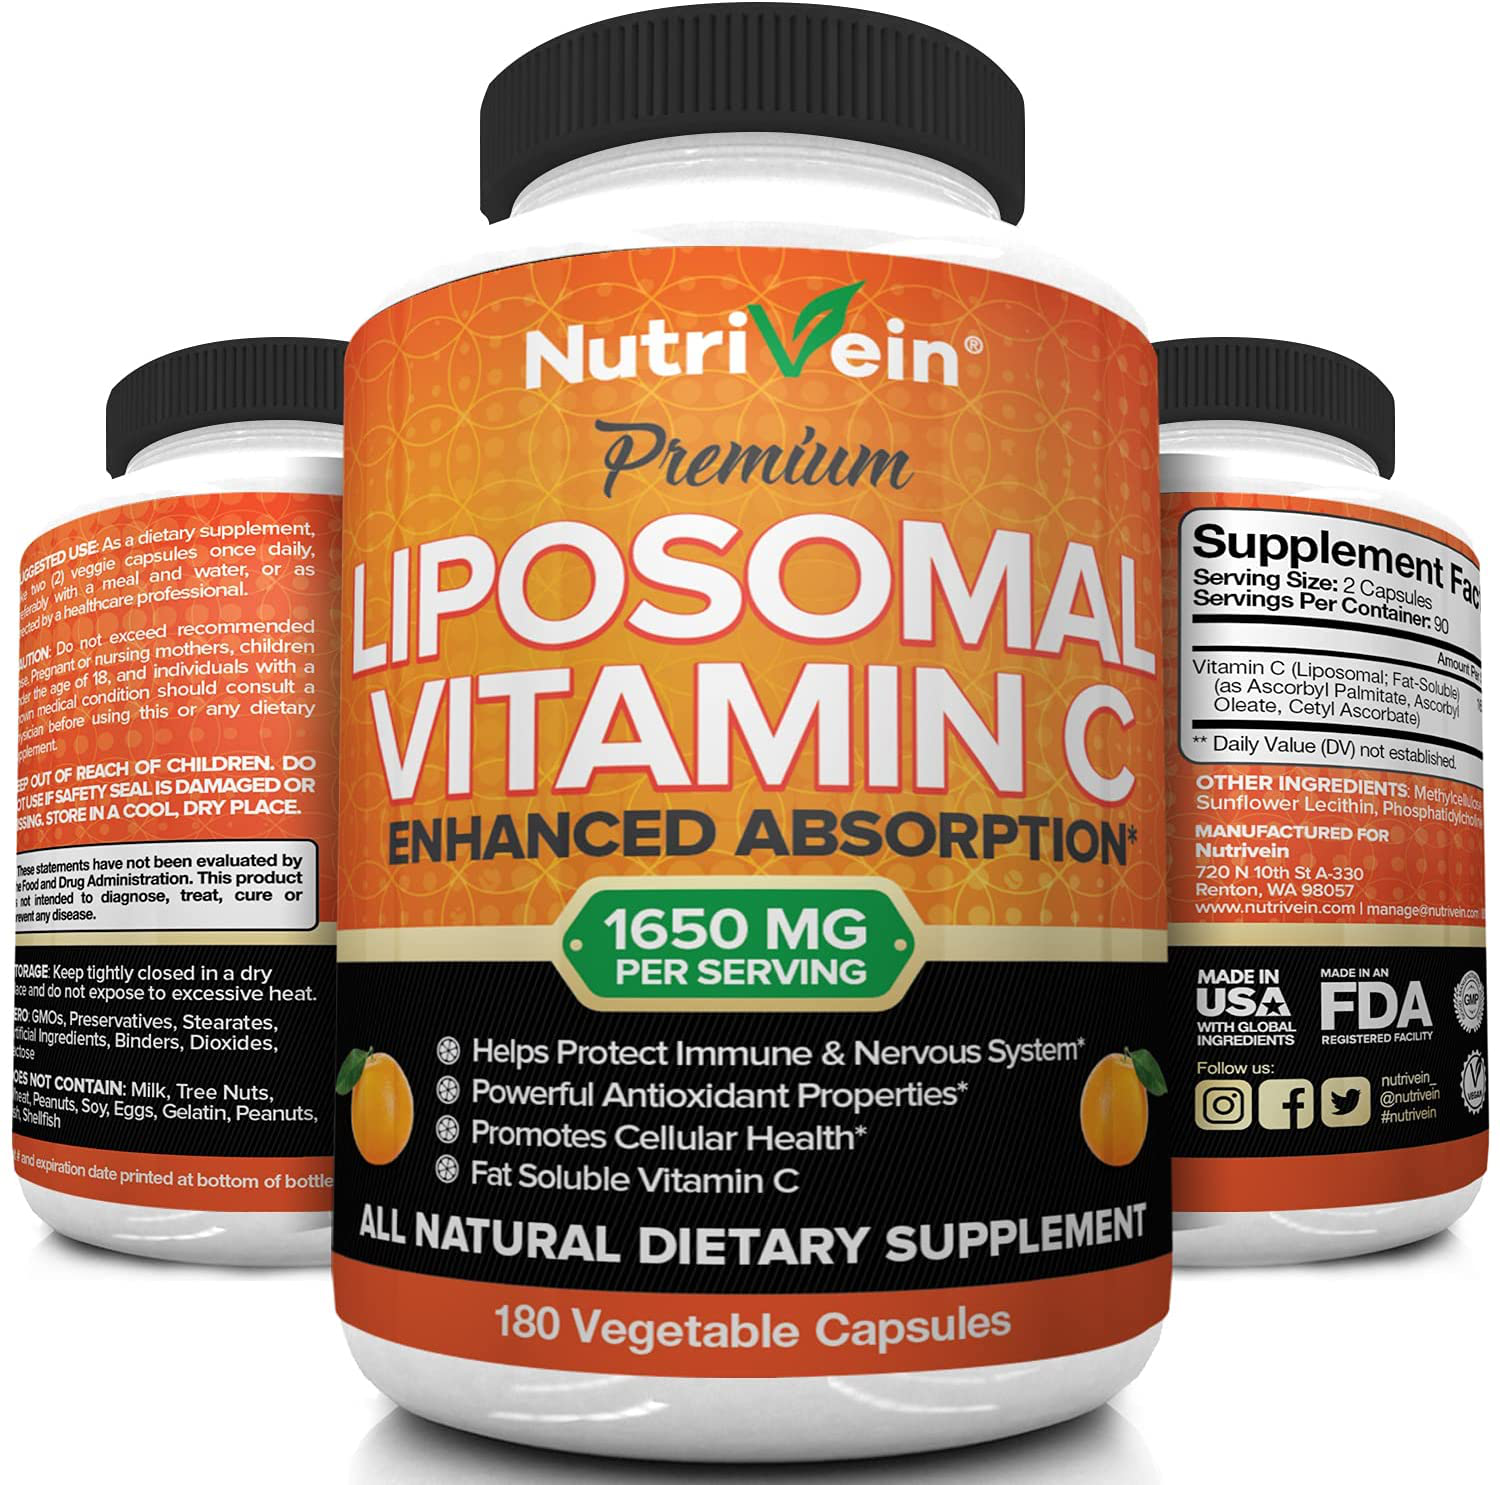 Nutrivein Liposomal Vitamin C 1650Mg - 180 Capsules - High Absorption Ascorbic Acid - Supports Immune System and Collagen Booster - Powerful Antioxidant High Dose Fat Soluble Supplement